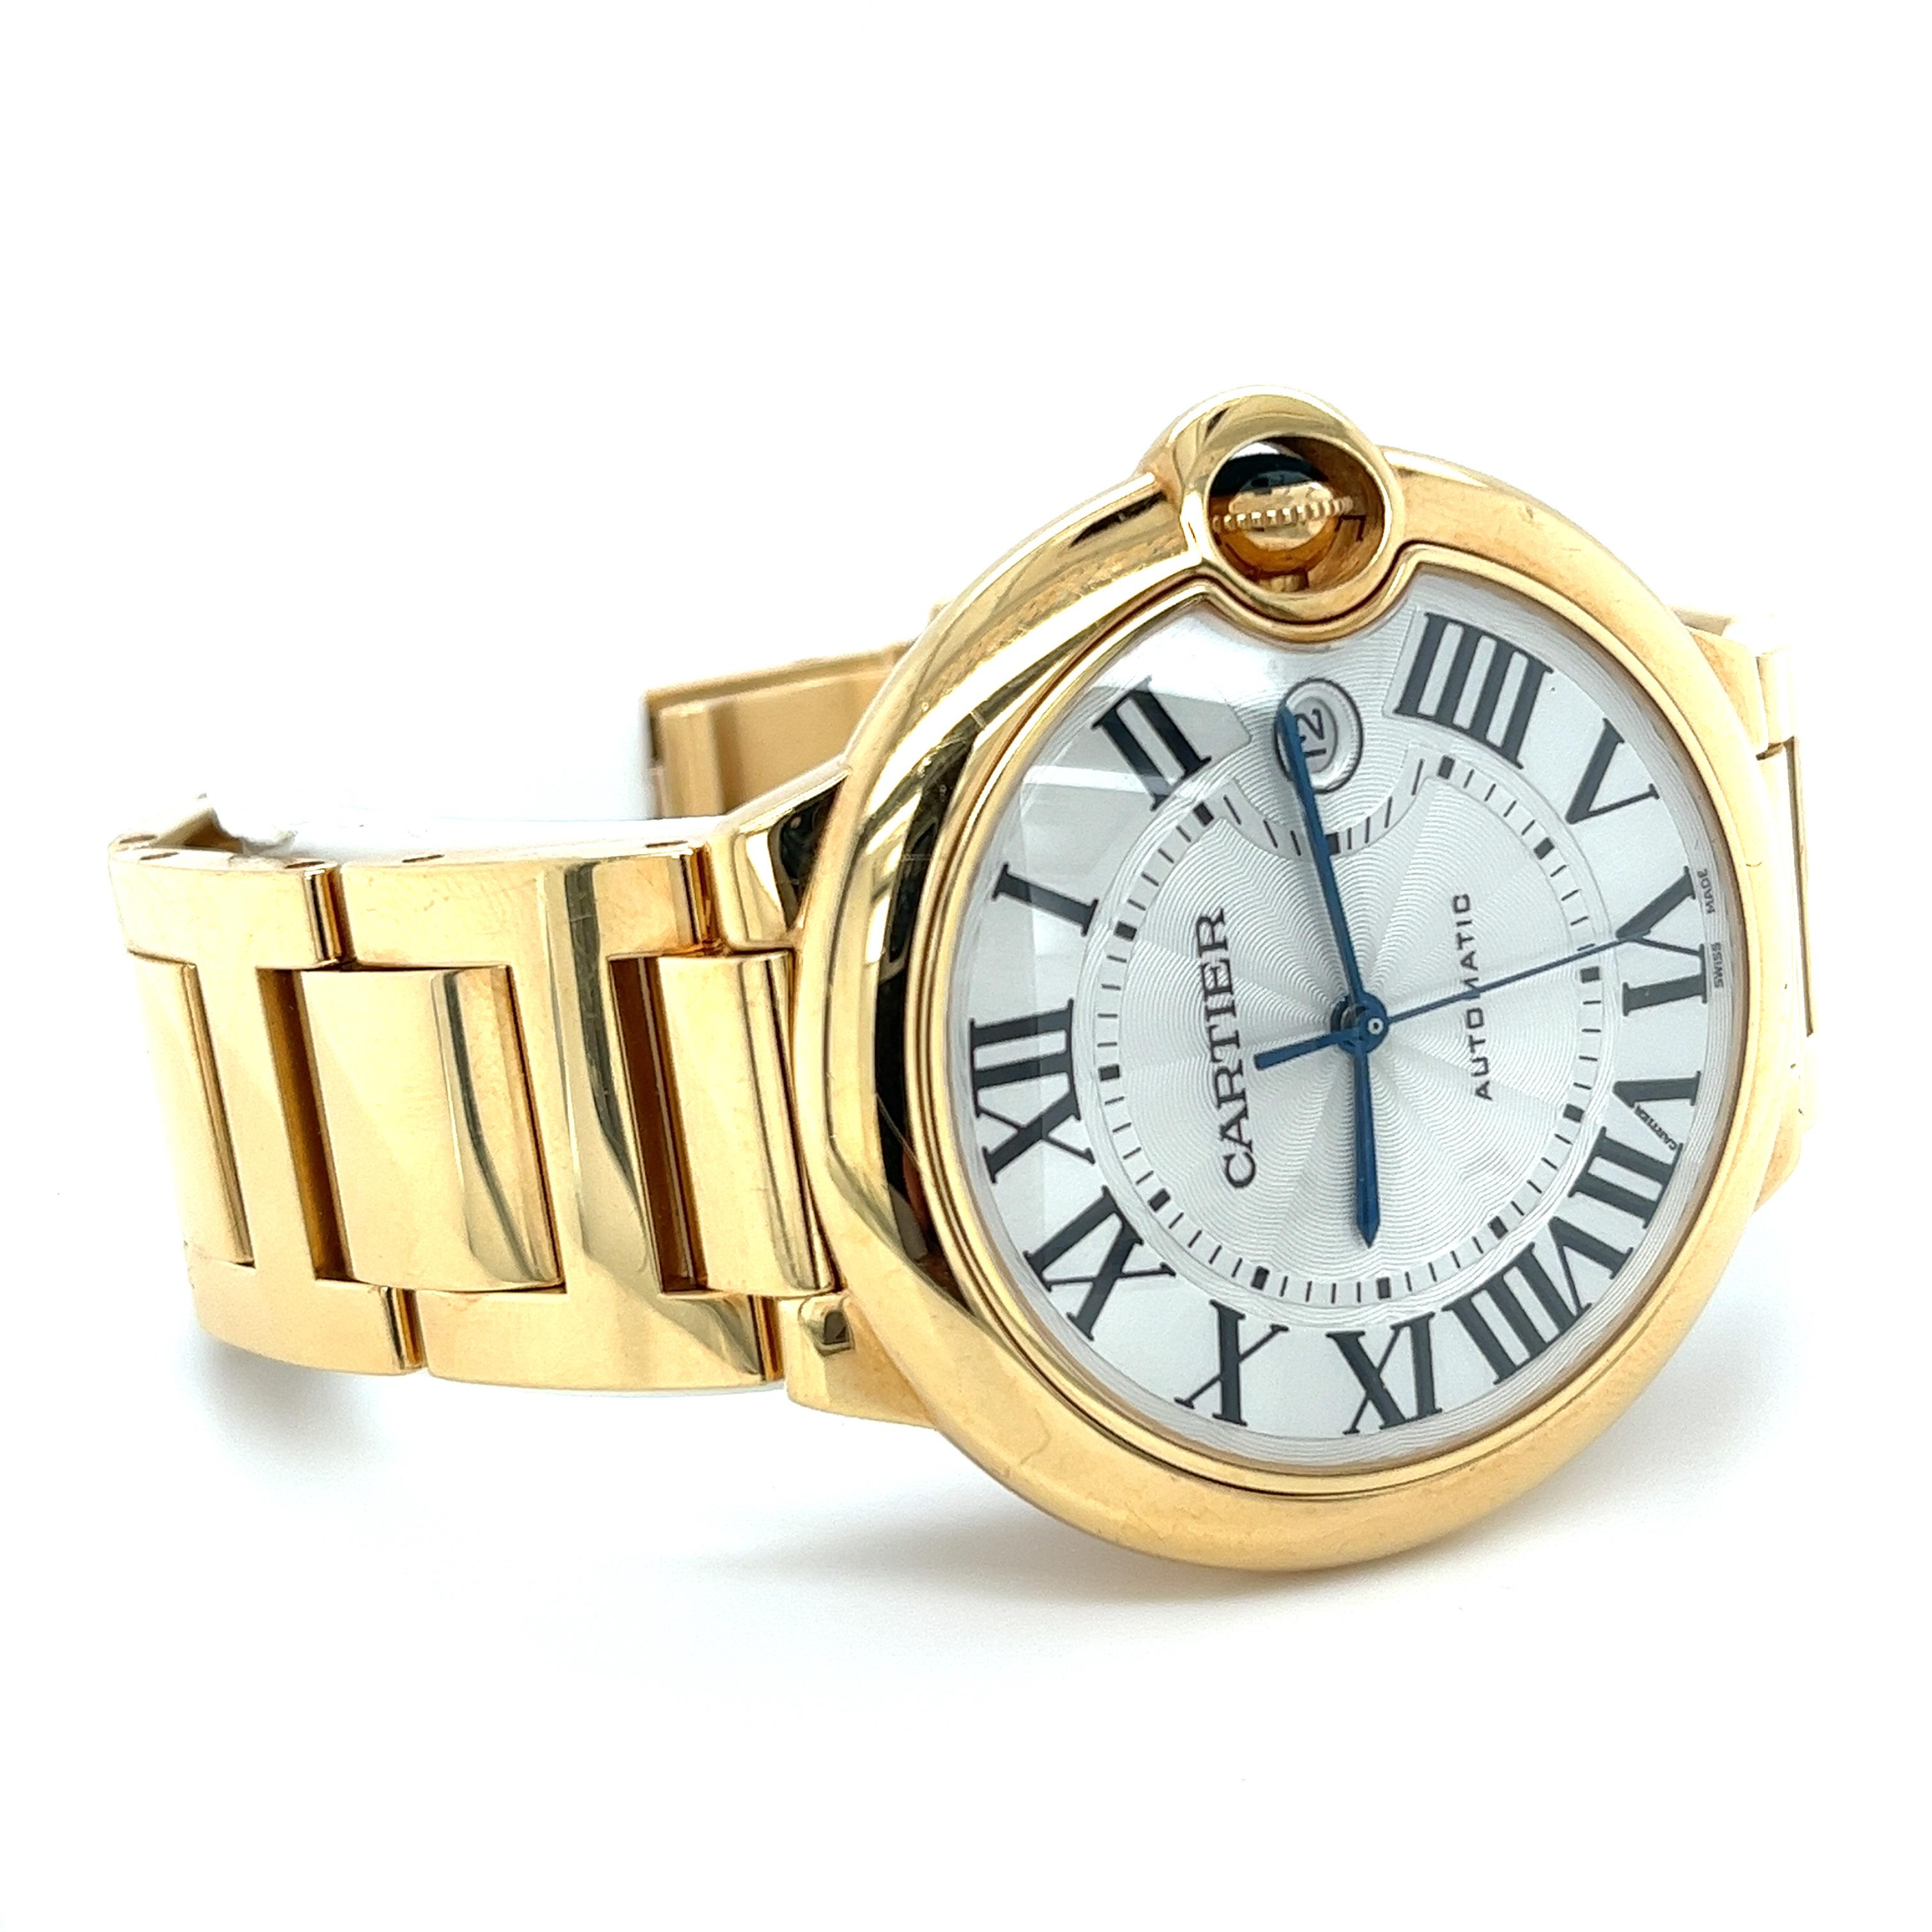 Cartier Ballon Bleu Jumbo Large Size Mens Watch in 18k Gold with Box/Papers en vente 3